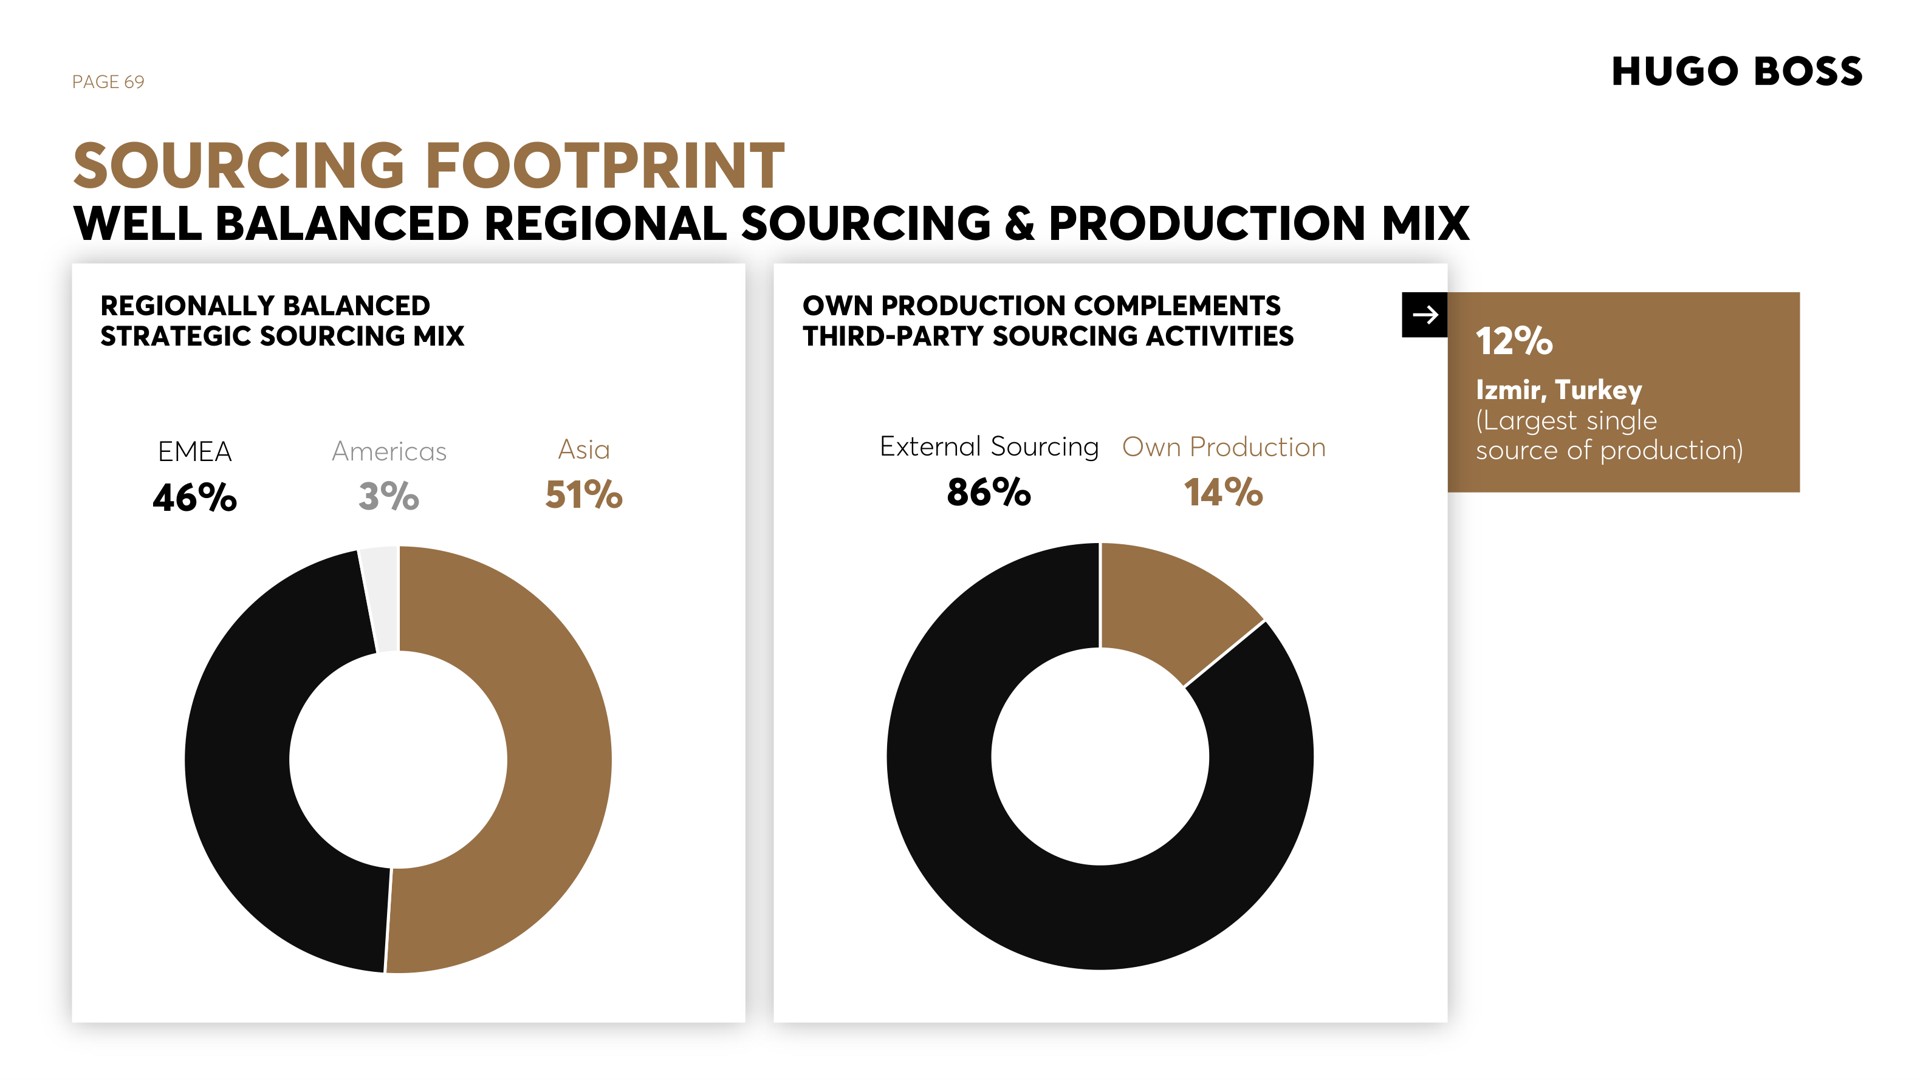 page sourcing footprint well balanced regional sourcing production mix regionally balanced strategic sourcing mix own production complements third party sourcing activities external sourcing own production turkey single source of production boss | Hugo Boss